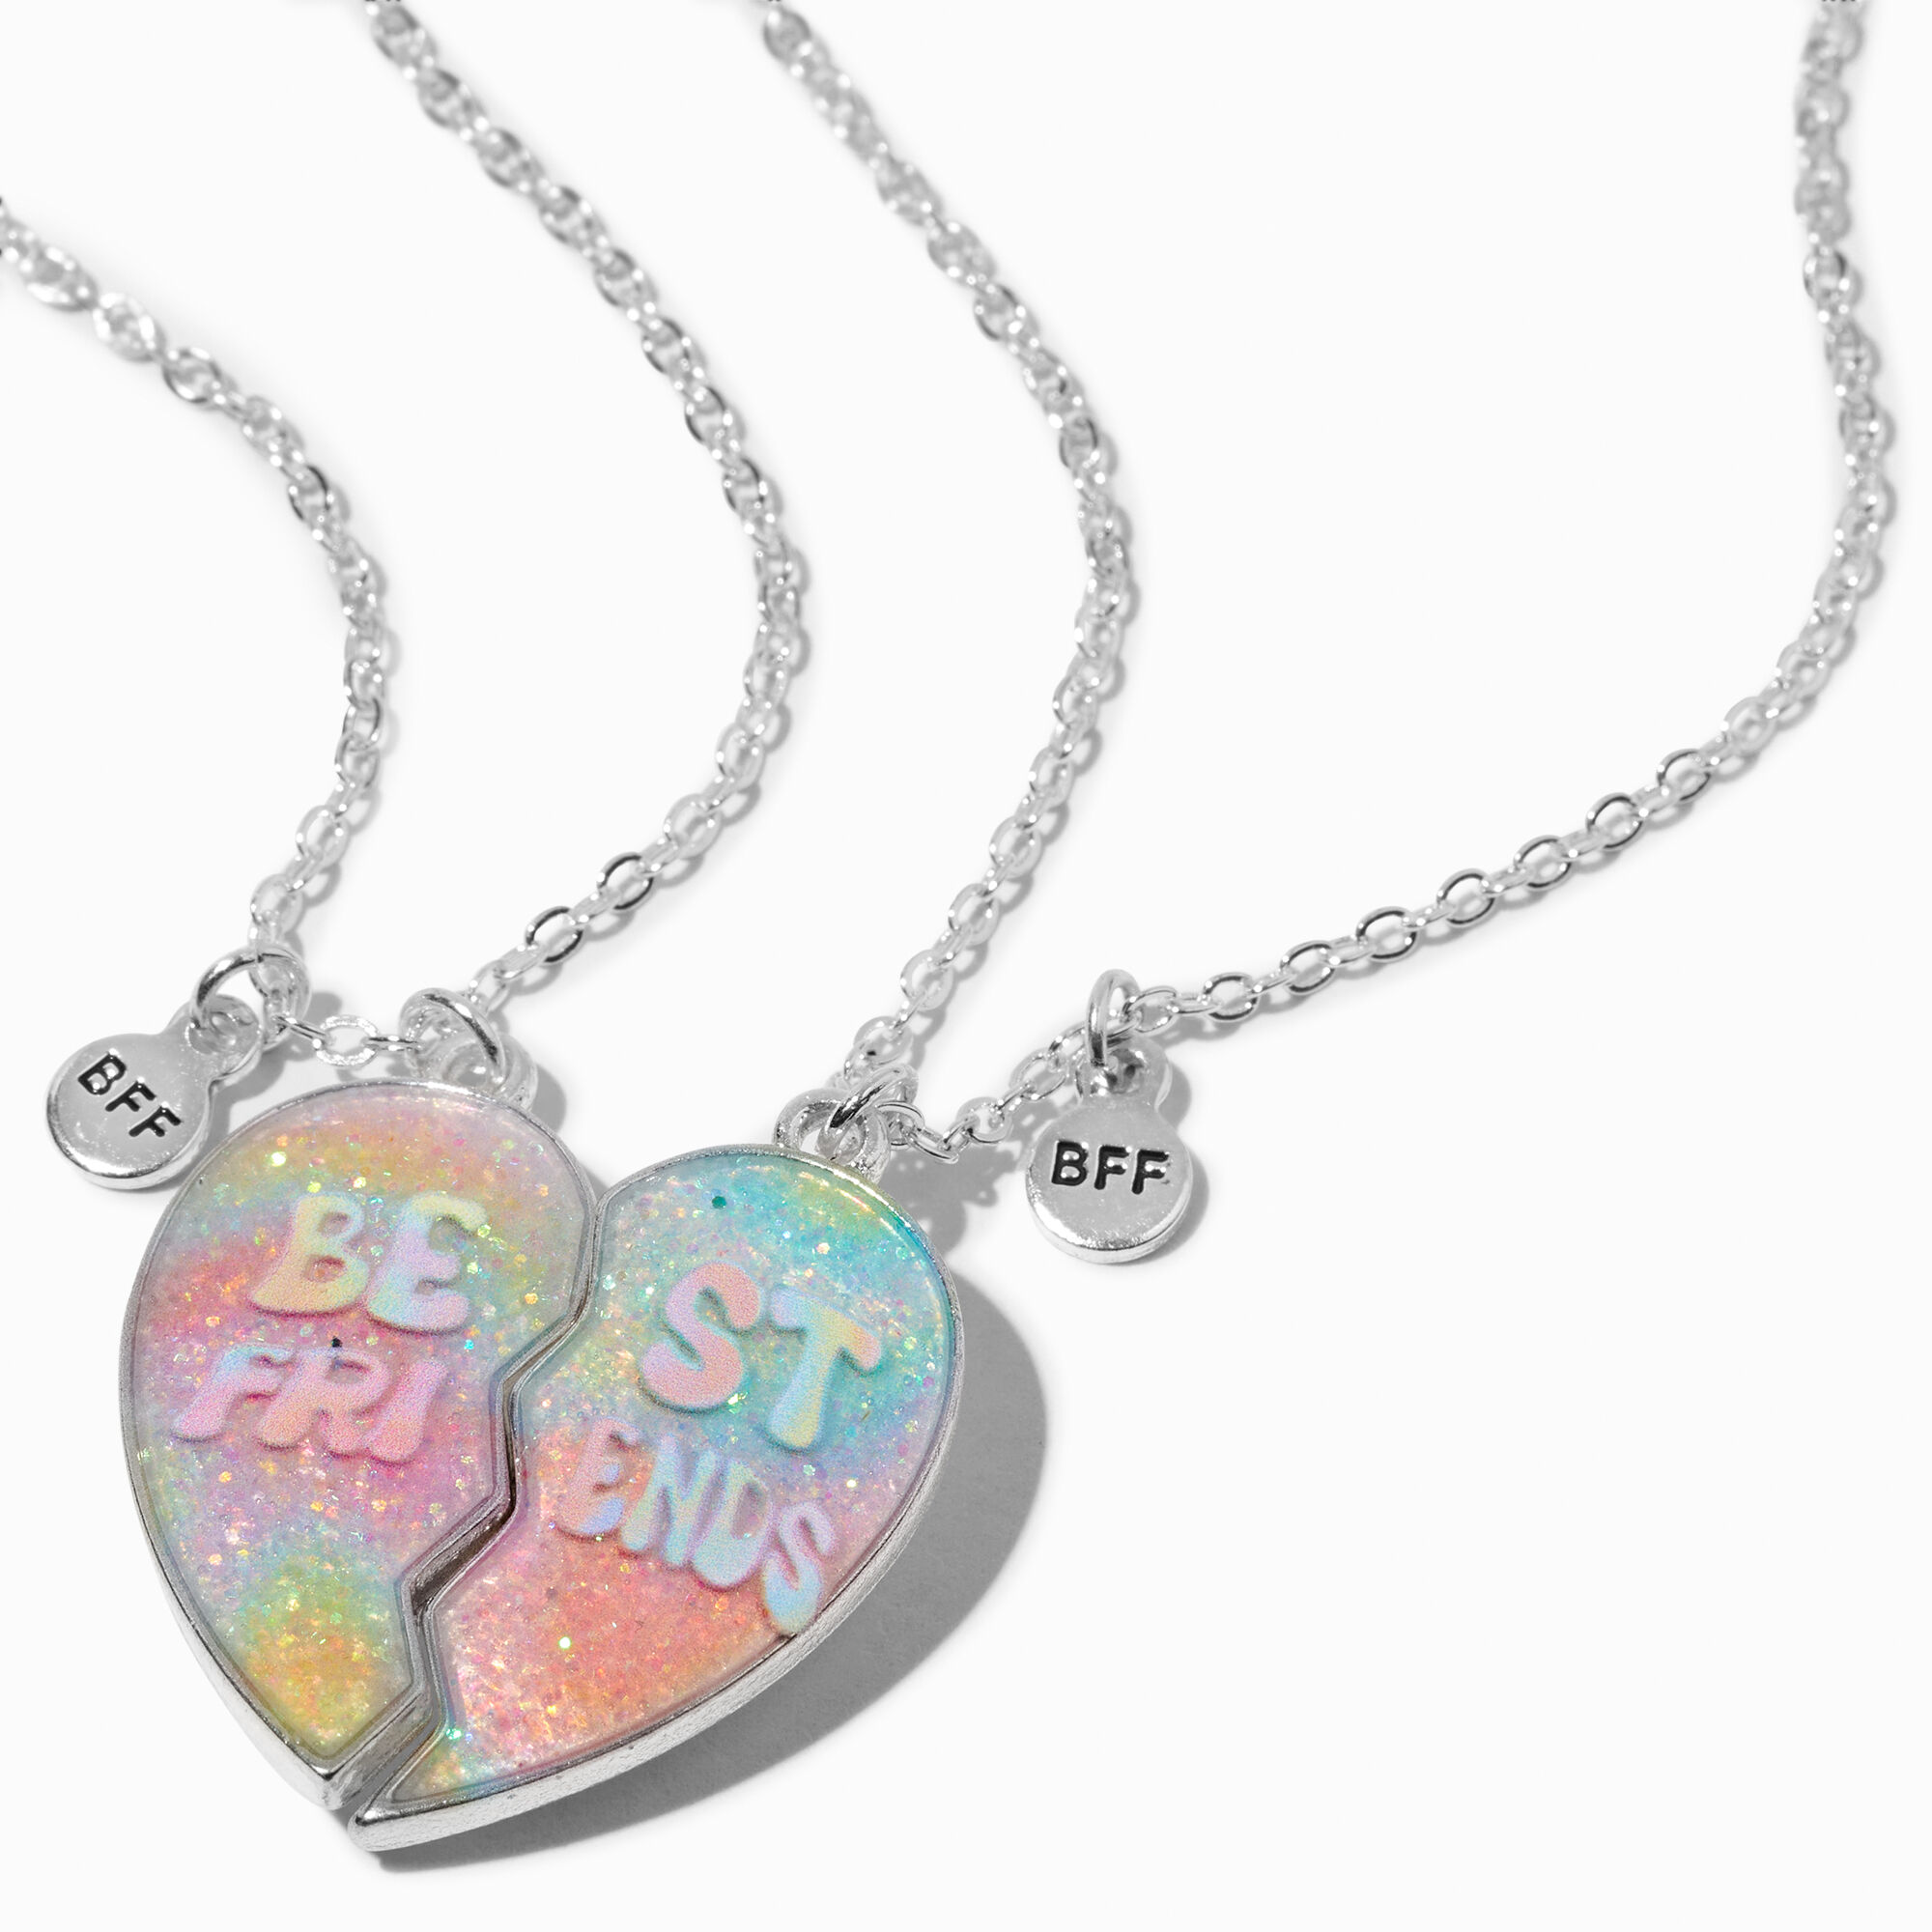 SANNIDHI BFF Necklace for 2 Girls Best Friend Necklace for Women, Alloy  Half Heart Pendant Love Sisters Friendship Necklace for 2 Best Friends,  Birthday Graduation Gifts(One Pair) at Rs 470.00 | Gurugram| ID:  2850575138862